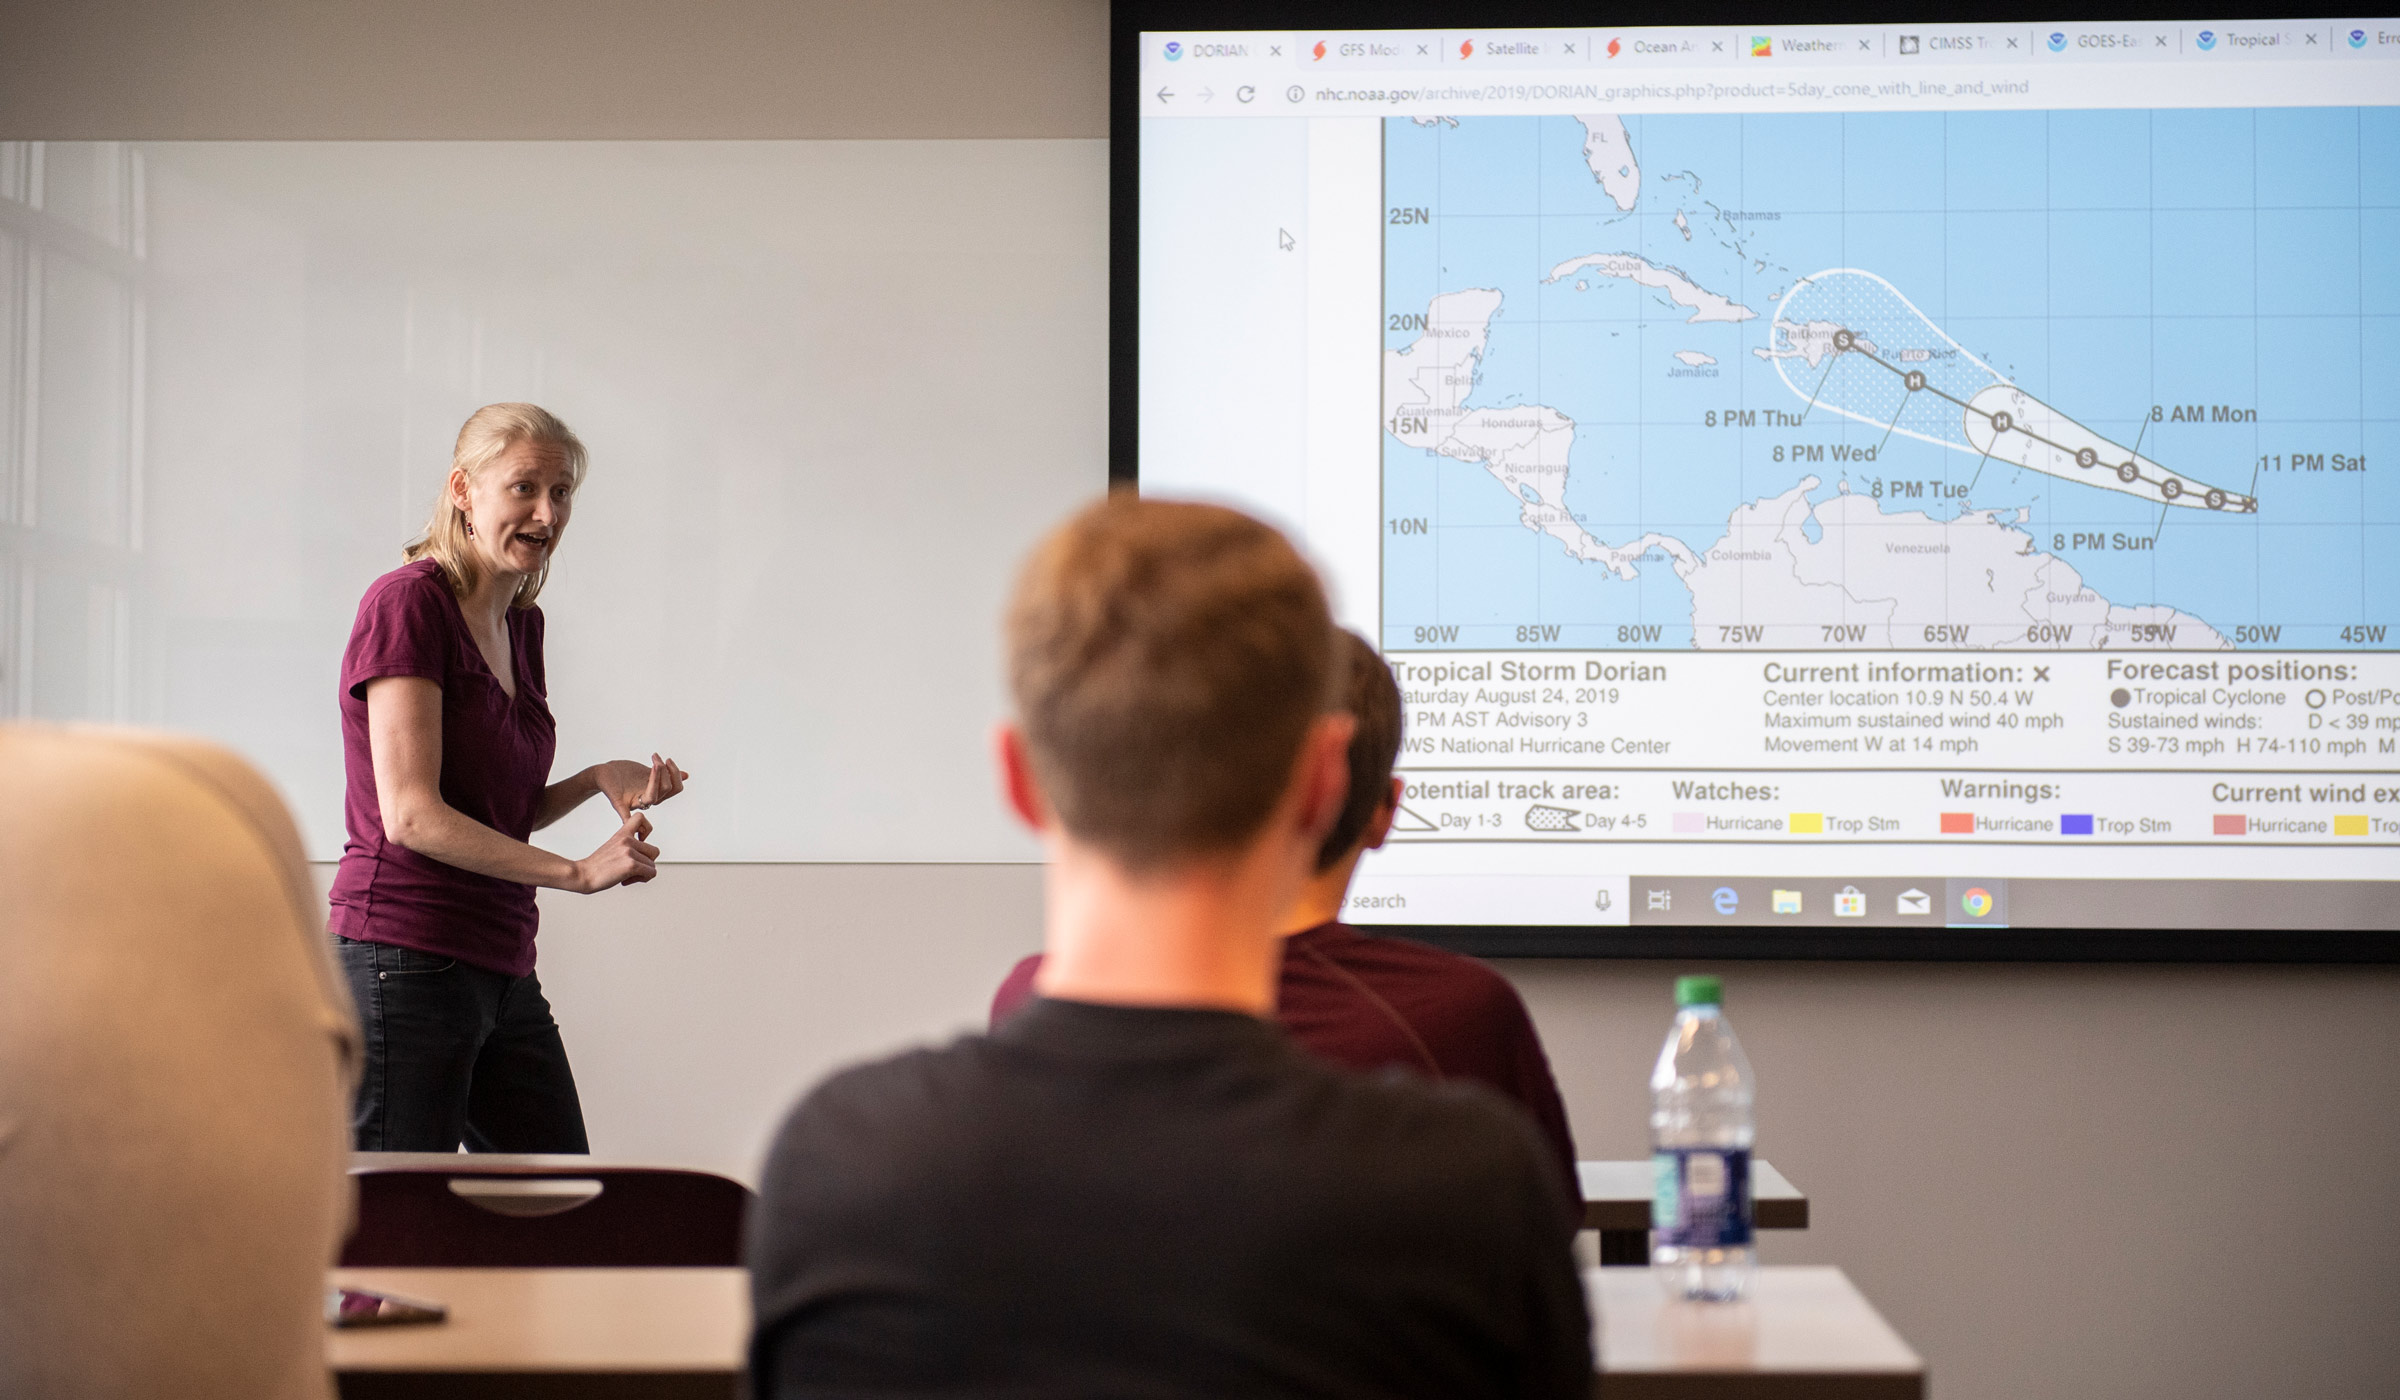 Kimberly Wood, assistant professor of geosciences and expert in tropical cyclones, briefs broadcast meteorology students on Tropical Storm Dorian.